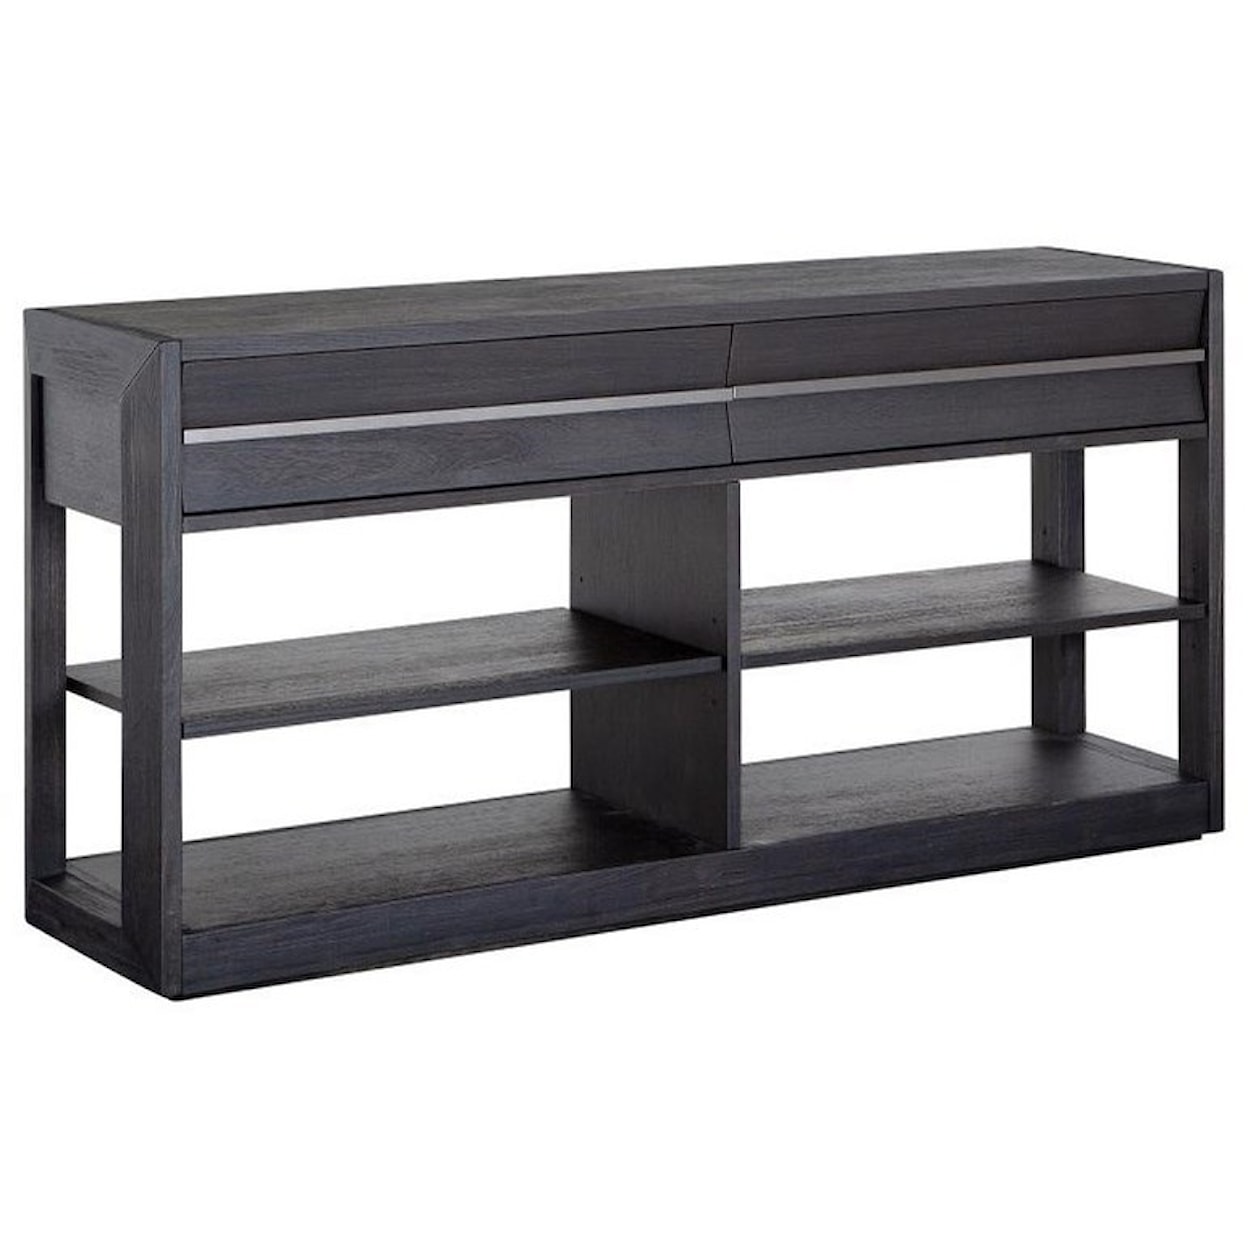 Magnussen Home Wentworth Village Bedroom Console Sofa Table